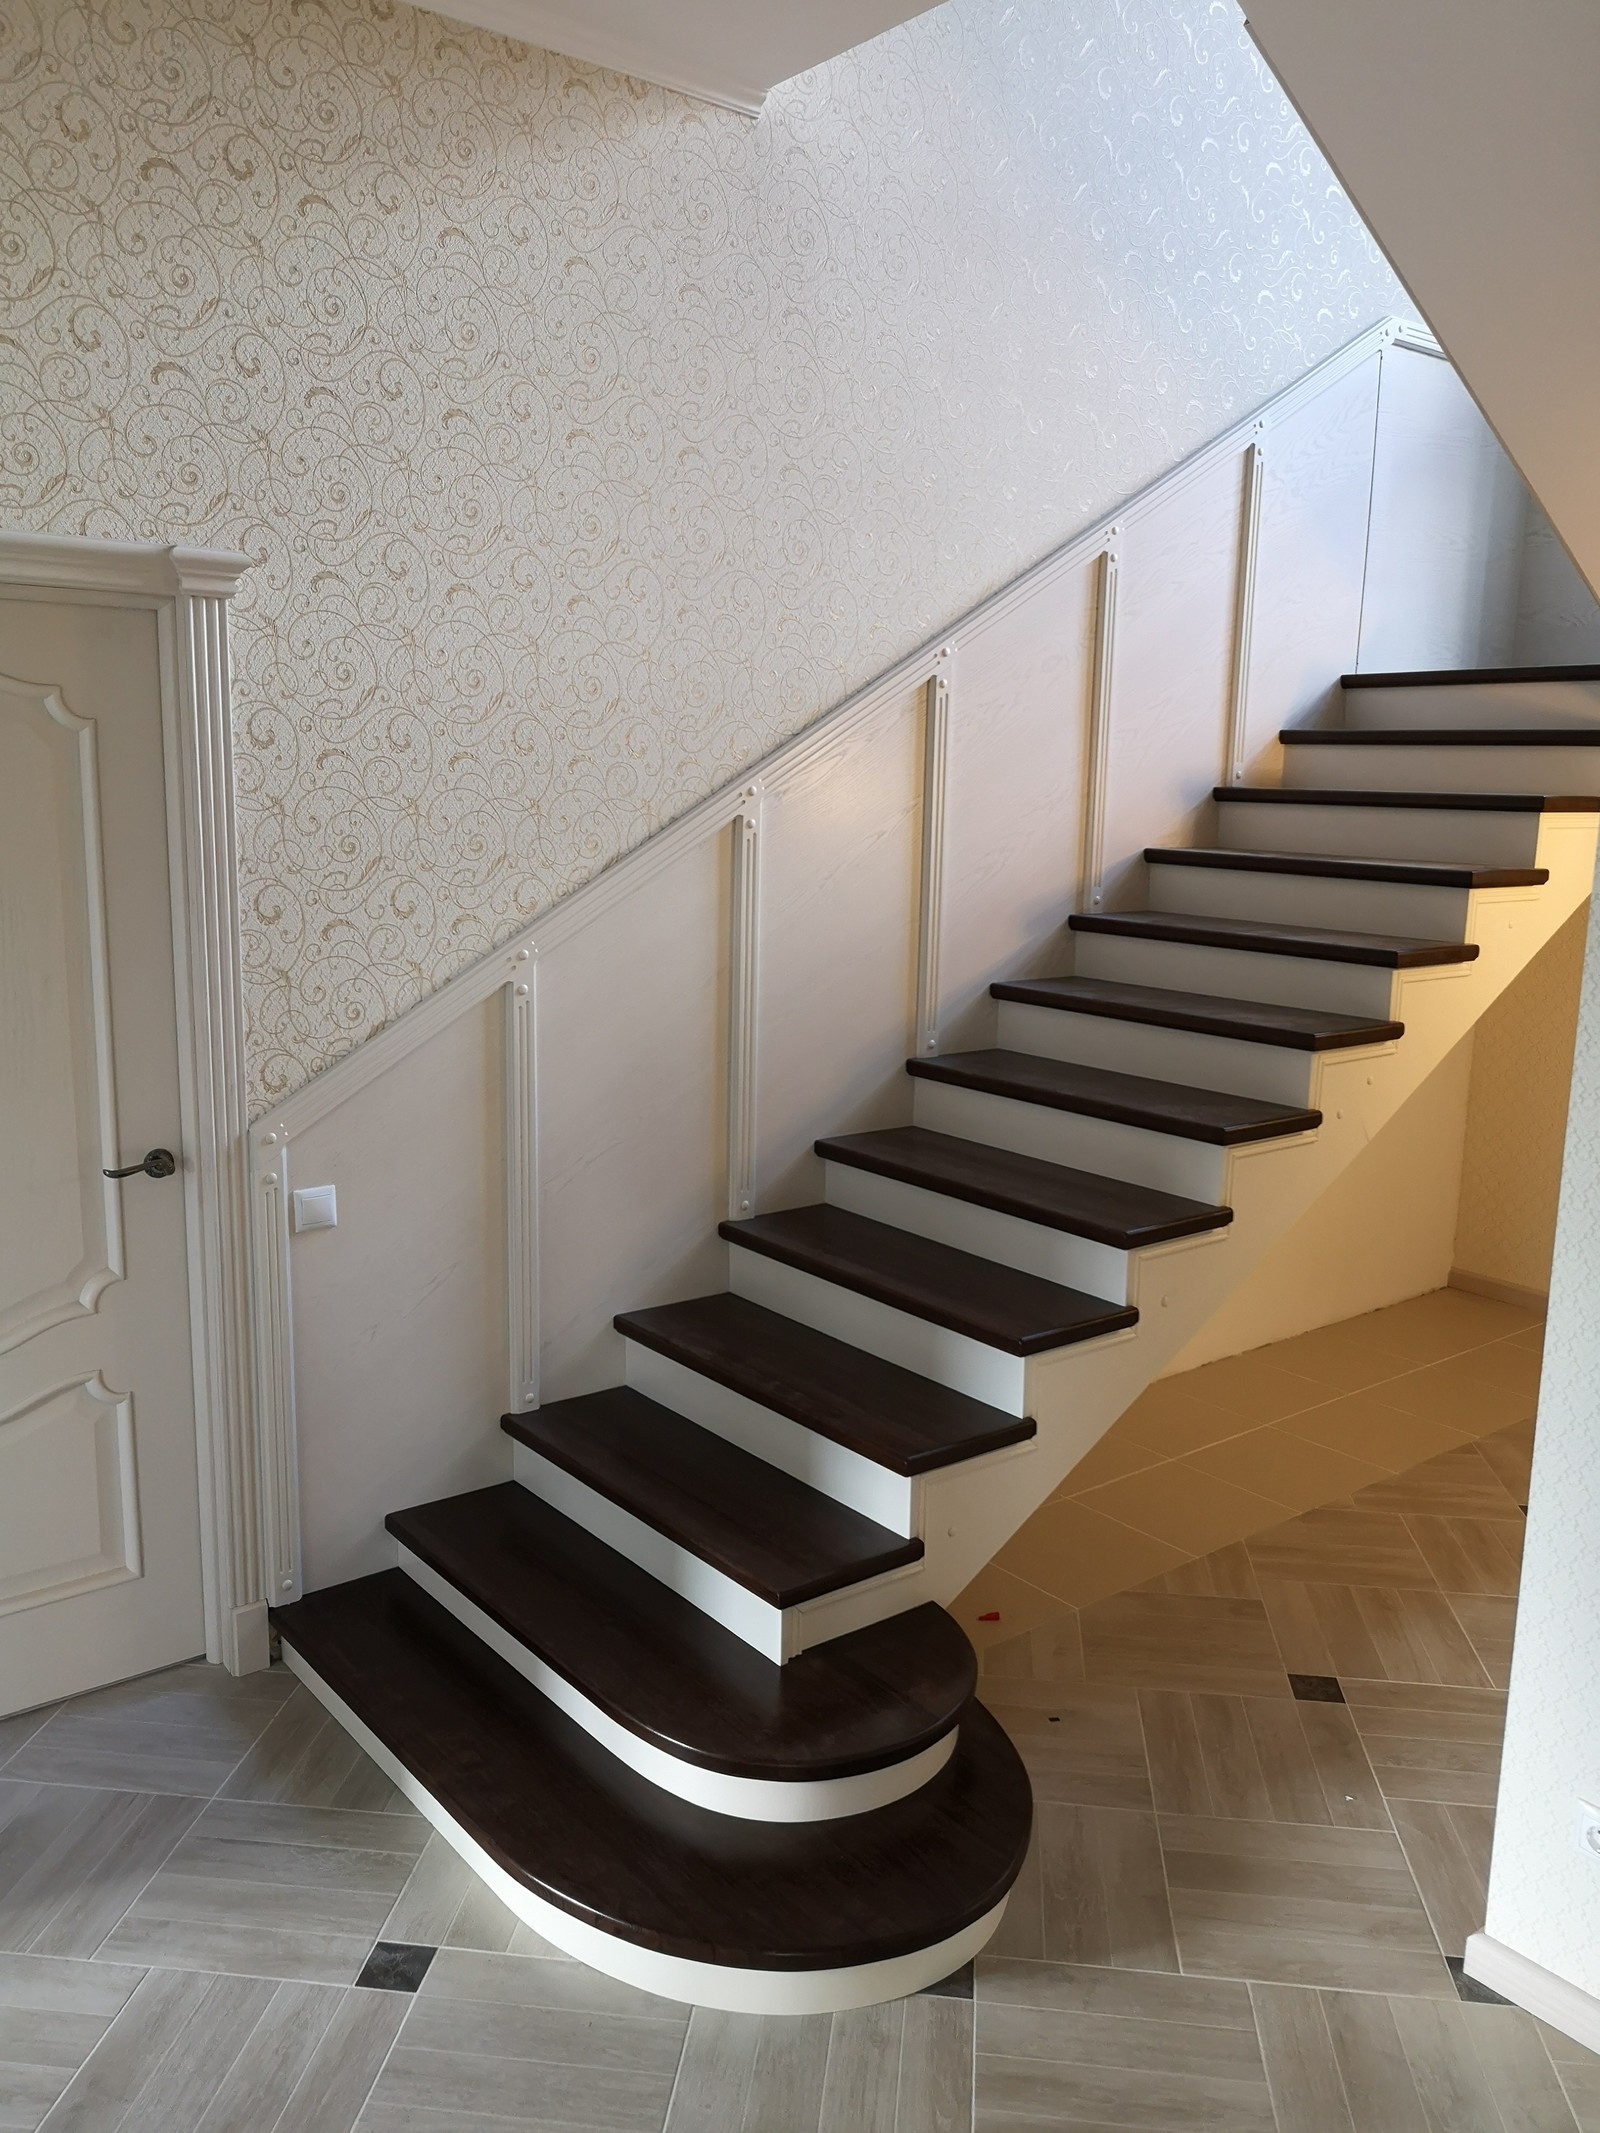 Classic is always in fashion - Longpost, Dacha, Interior Design, Idea for home, Stairs, My